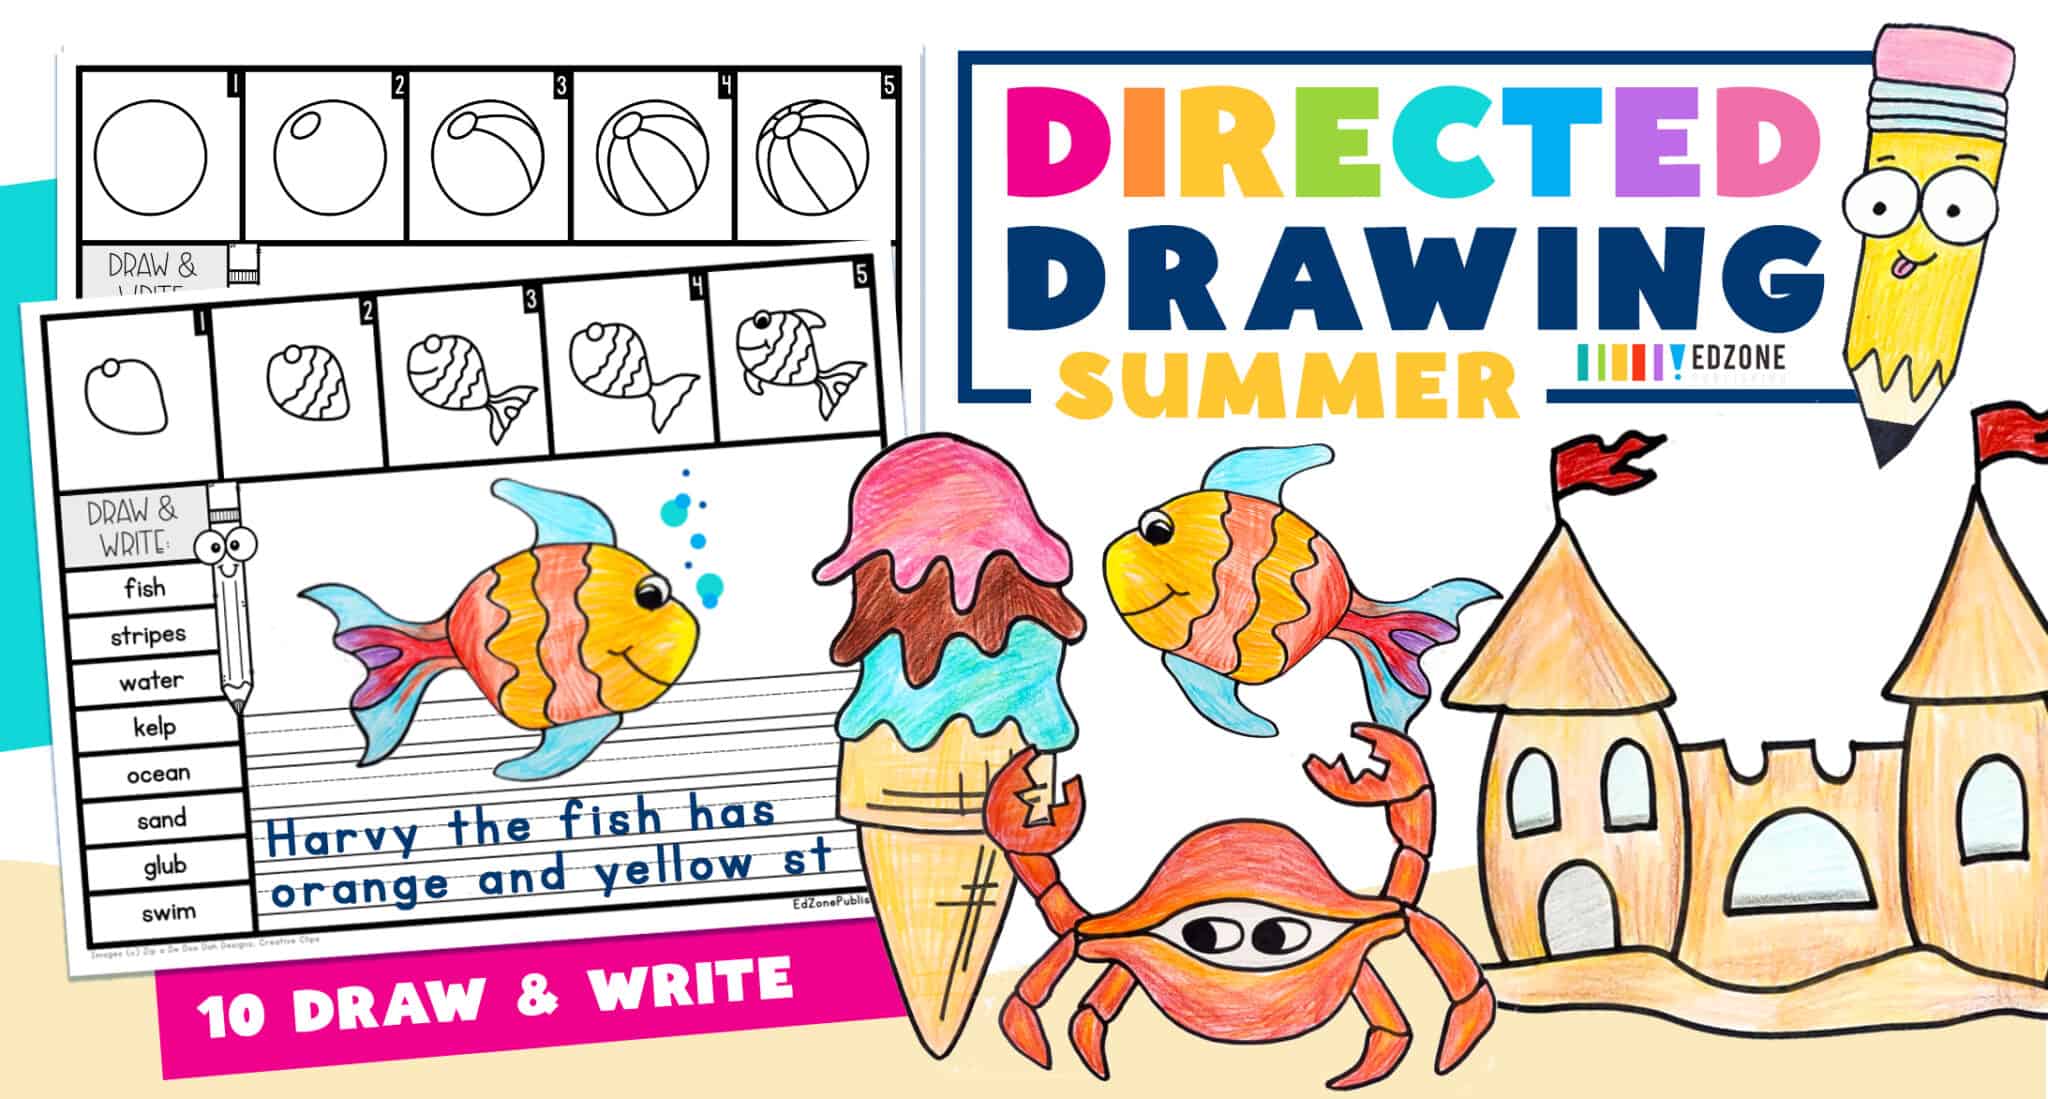 Directed Drawing Bundle The Crafty Classroom